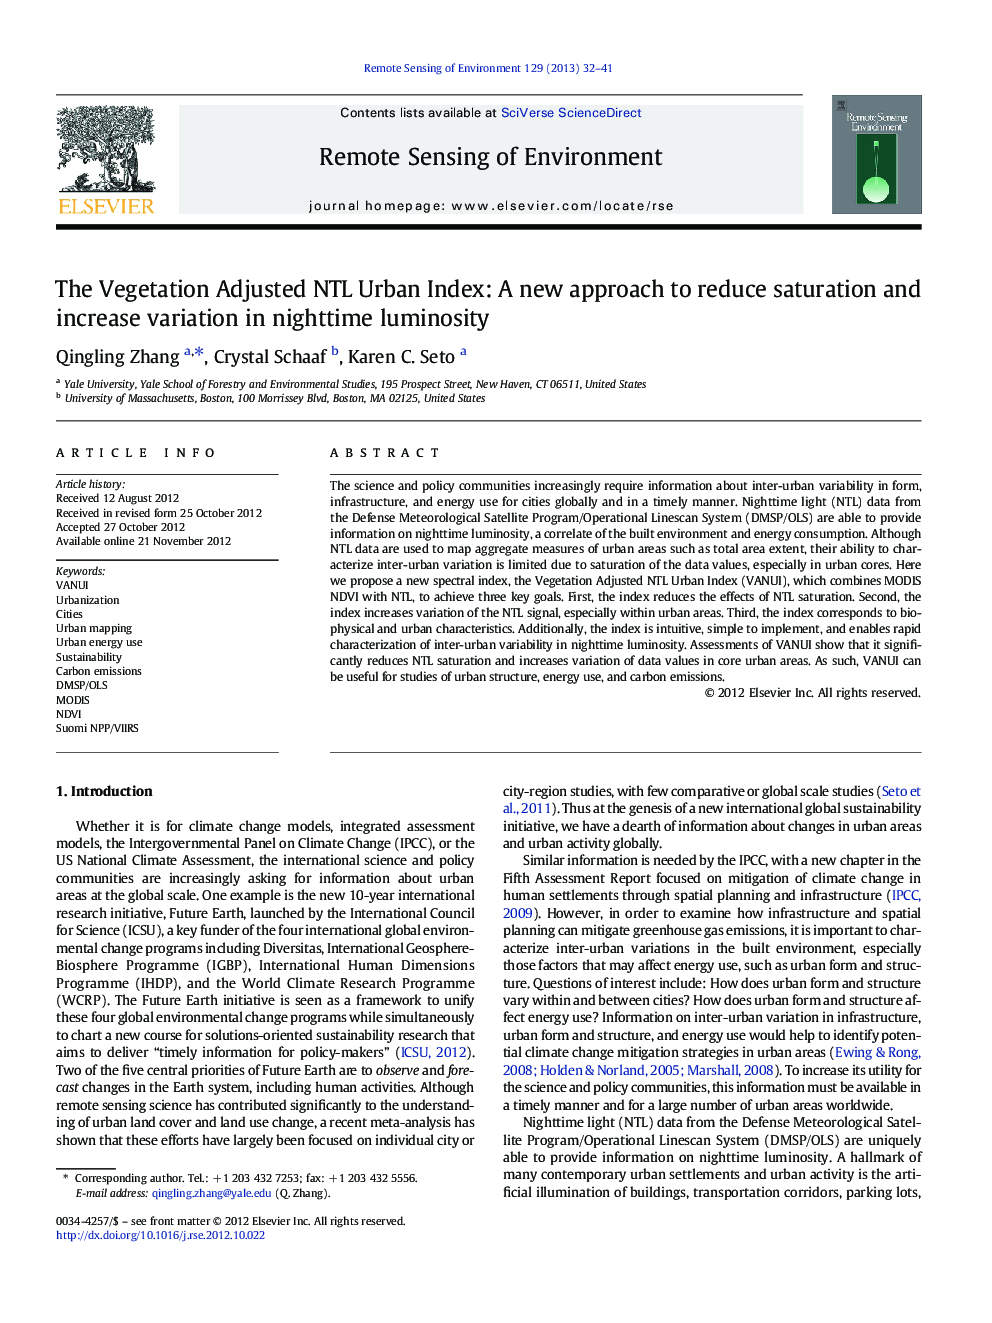 The Vegetation Adjusted NTL Urban Index: A new approach to reduce saturation and increase variation in nighttime luminosity